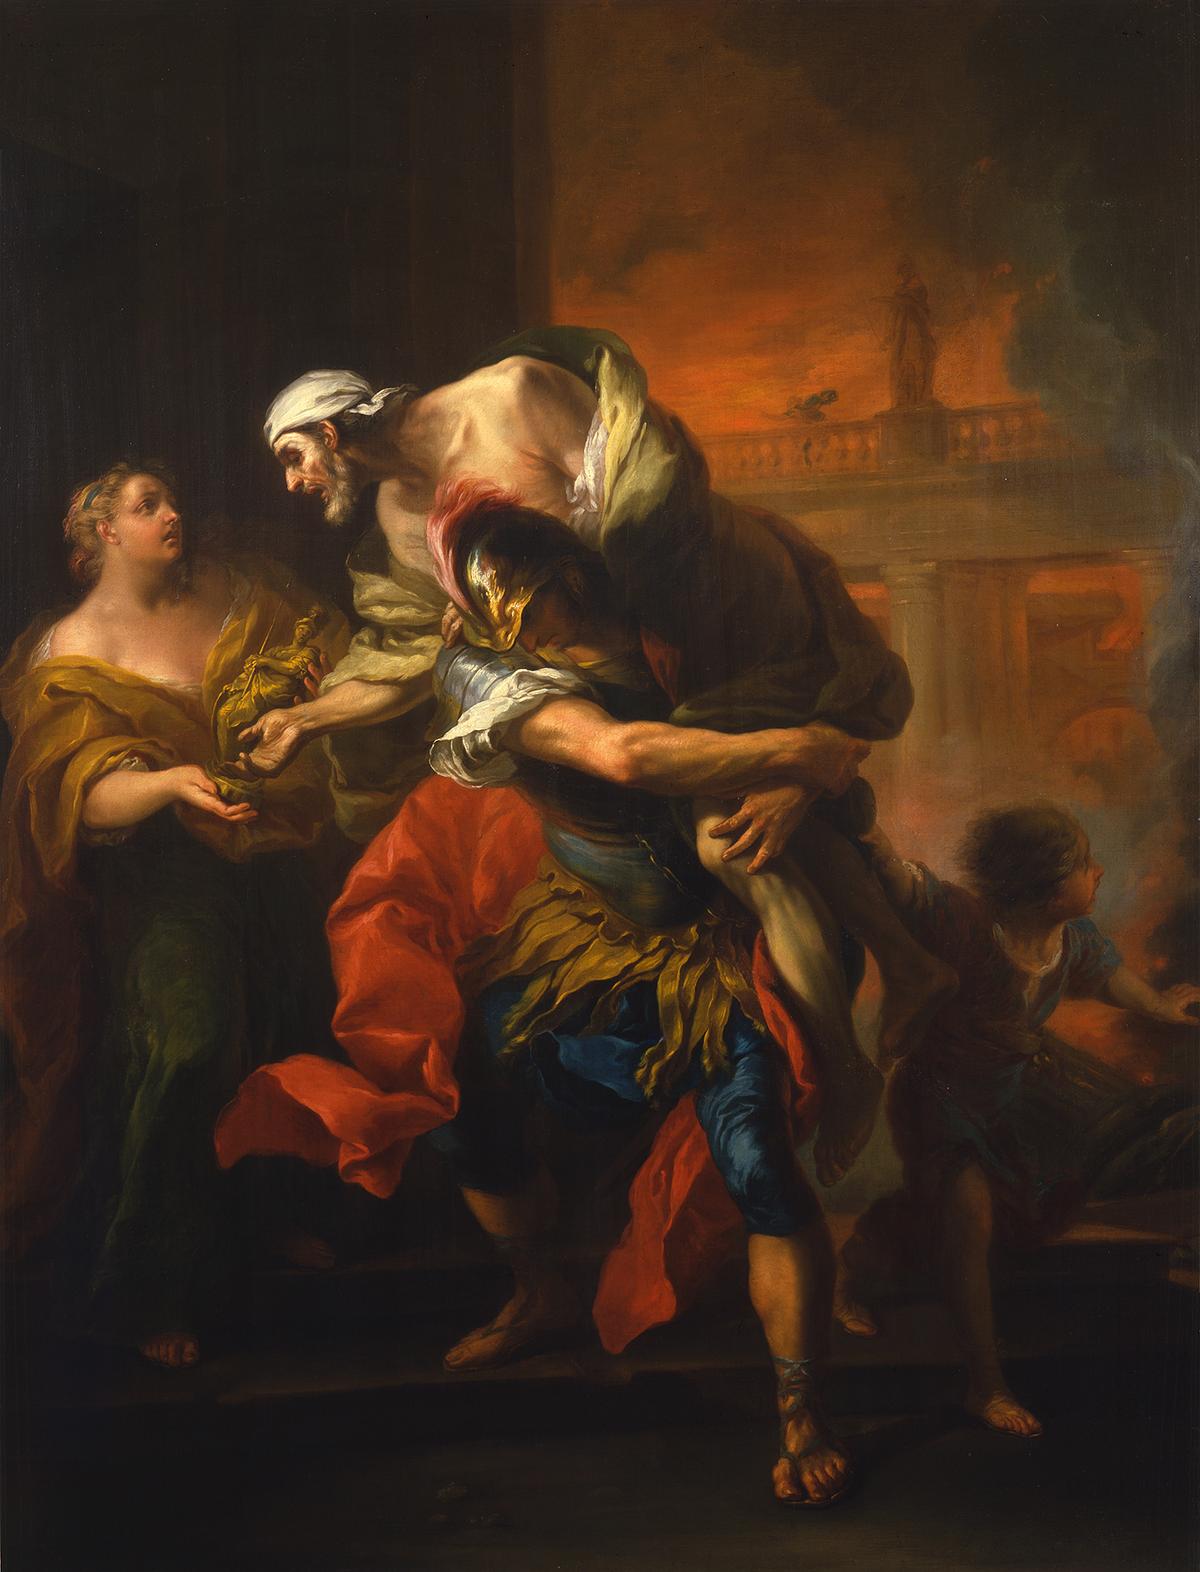 "Aeneas Rescuing His Father From the Fire at Troy," 18th century, by Charles-André van Loo. Oil on canvas. Nationalmuseum, Stockholm. (Public Domain)